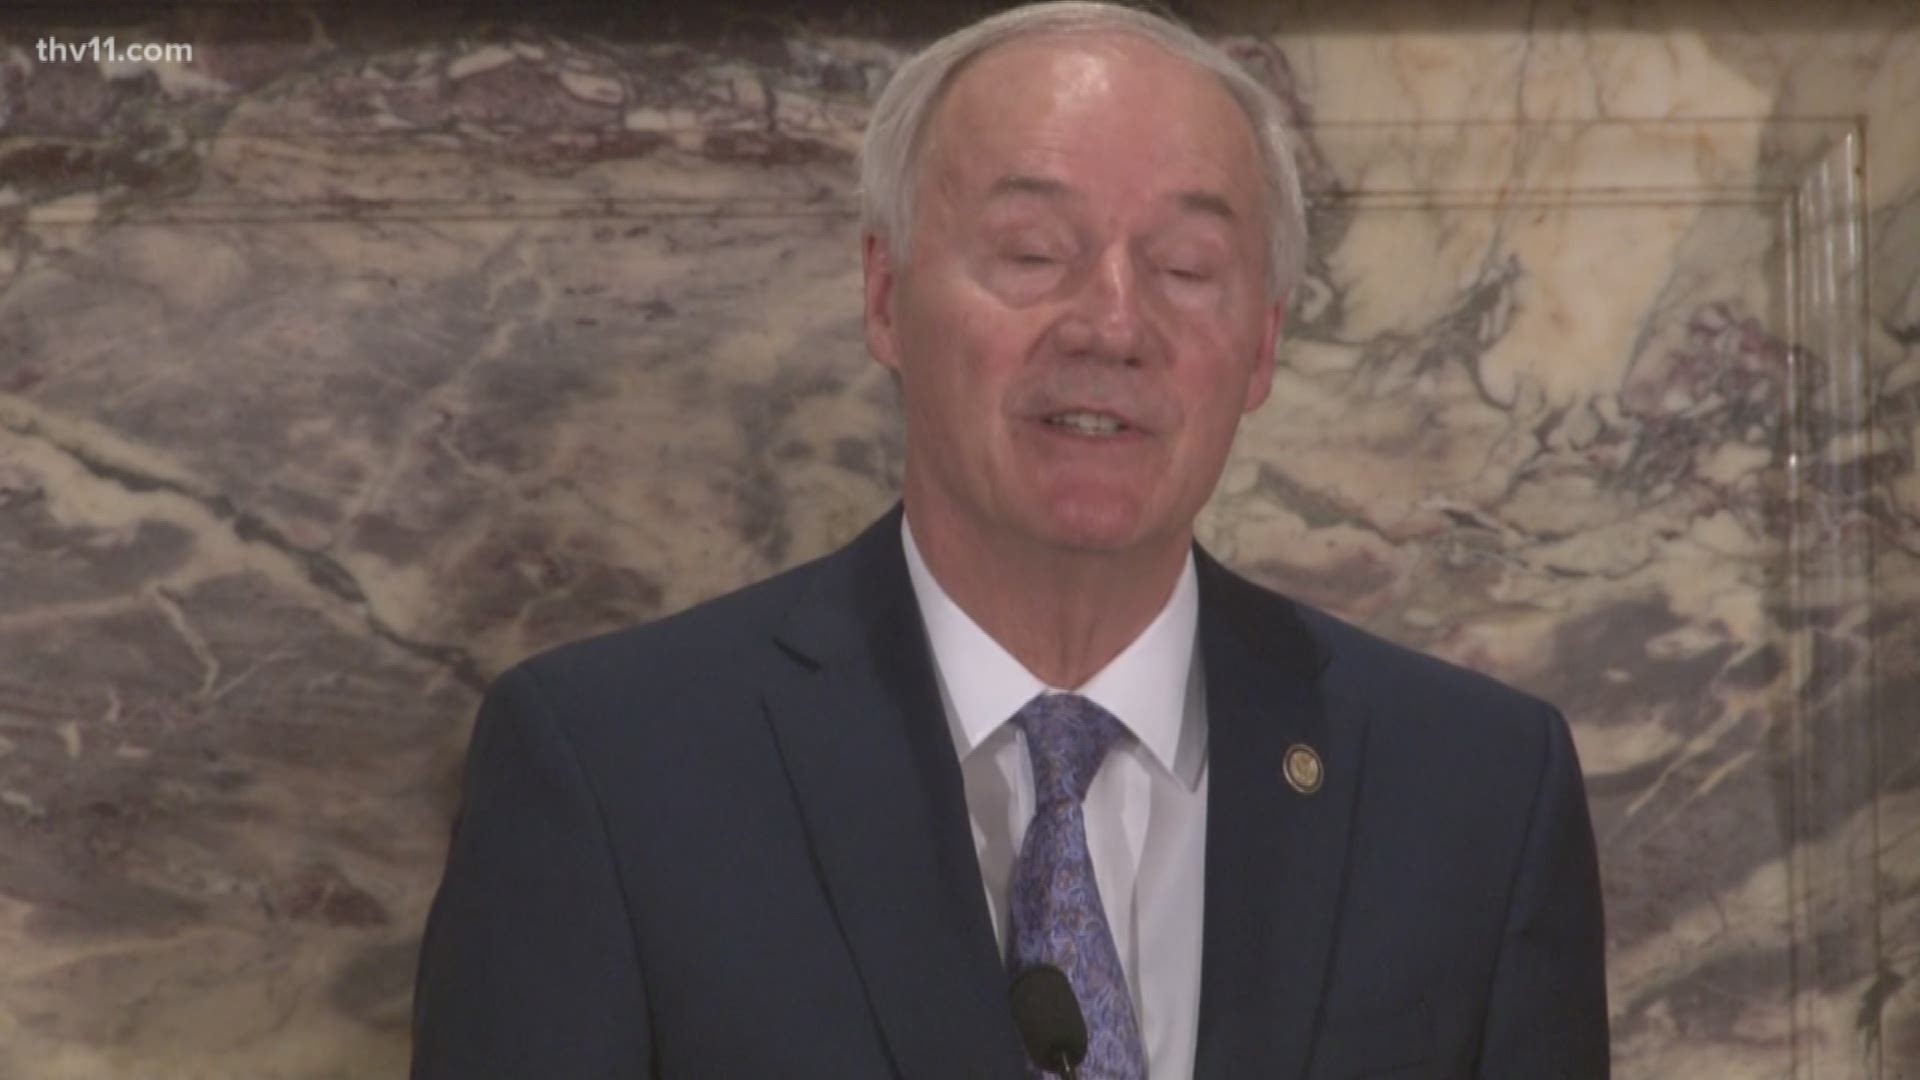 The work requirement for Medicaid in Arkansas is gone, but if Governor Asa Hutchinson gets his way, it will return.